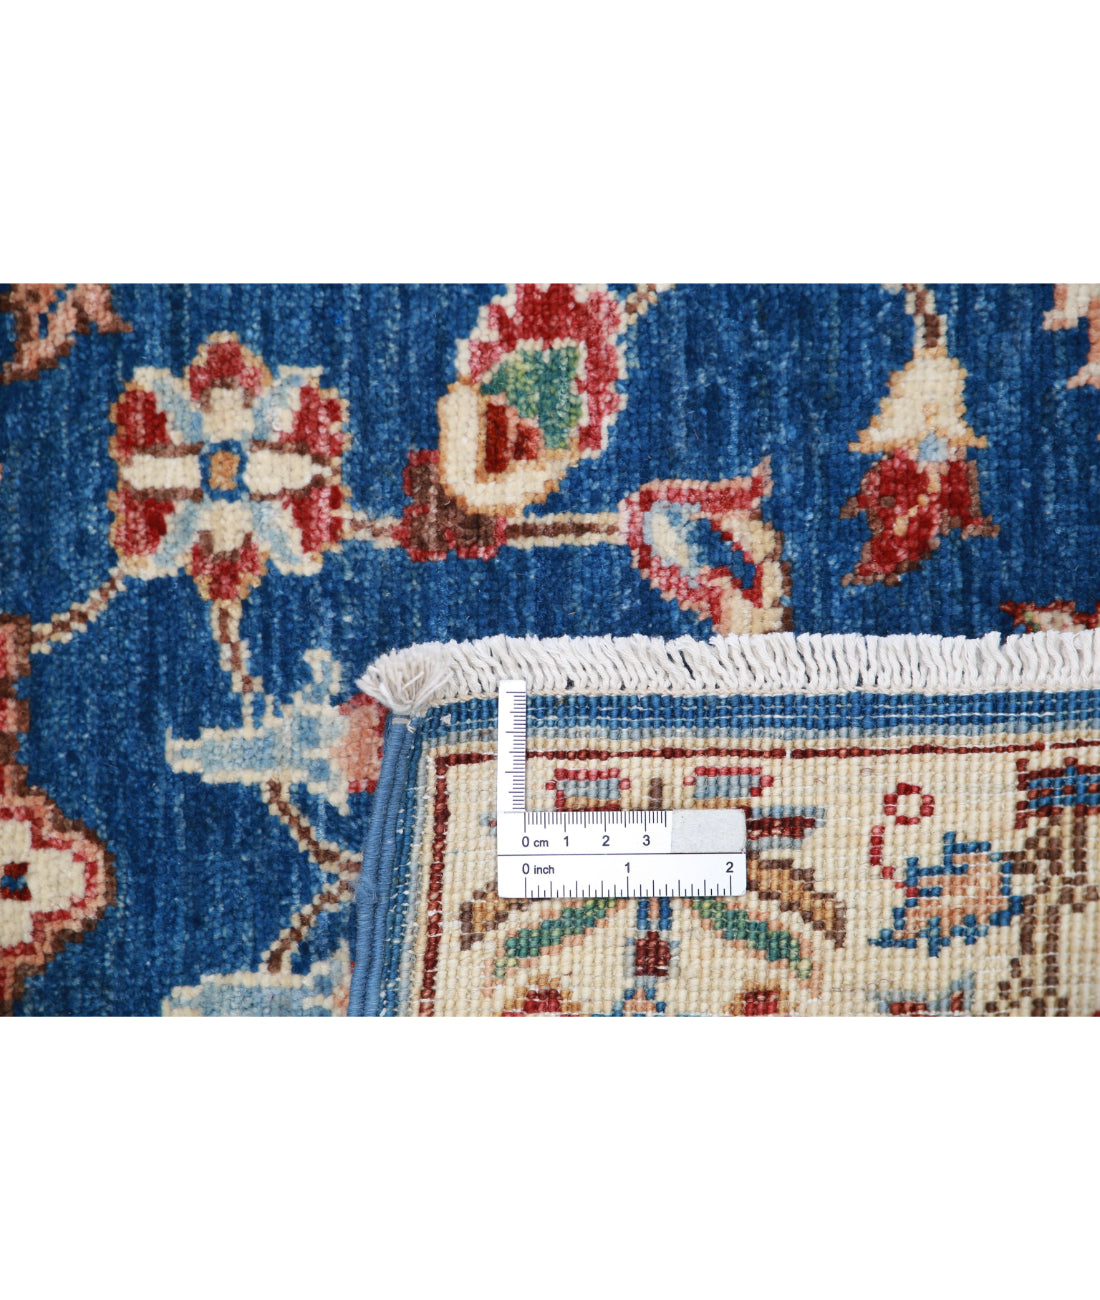 Ziegler 2'7'' X 3'10'' Hand-Knotted Wool Rug 2'7'' x 3'10'' (78 X 115) / Blue / Ivory